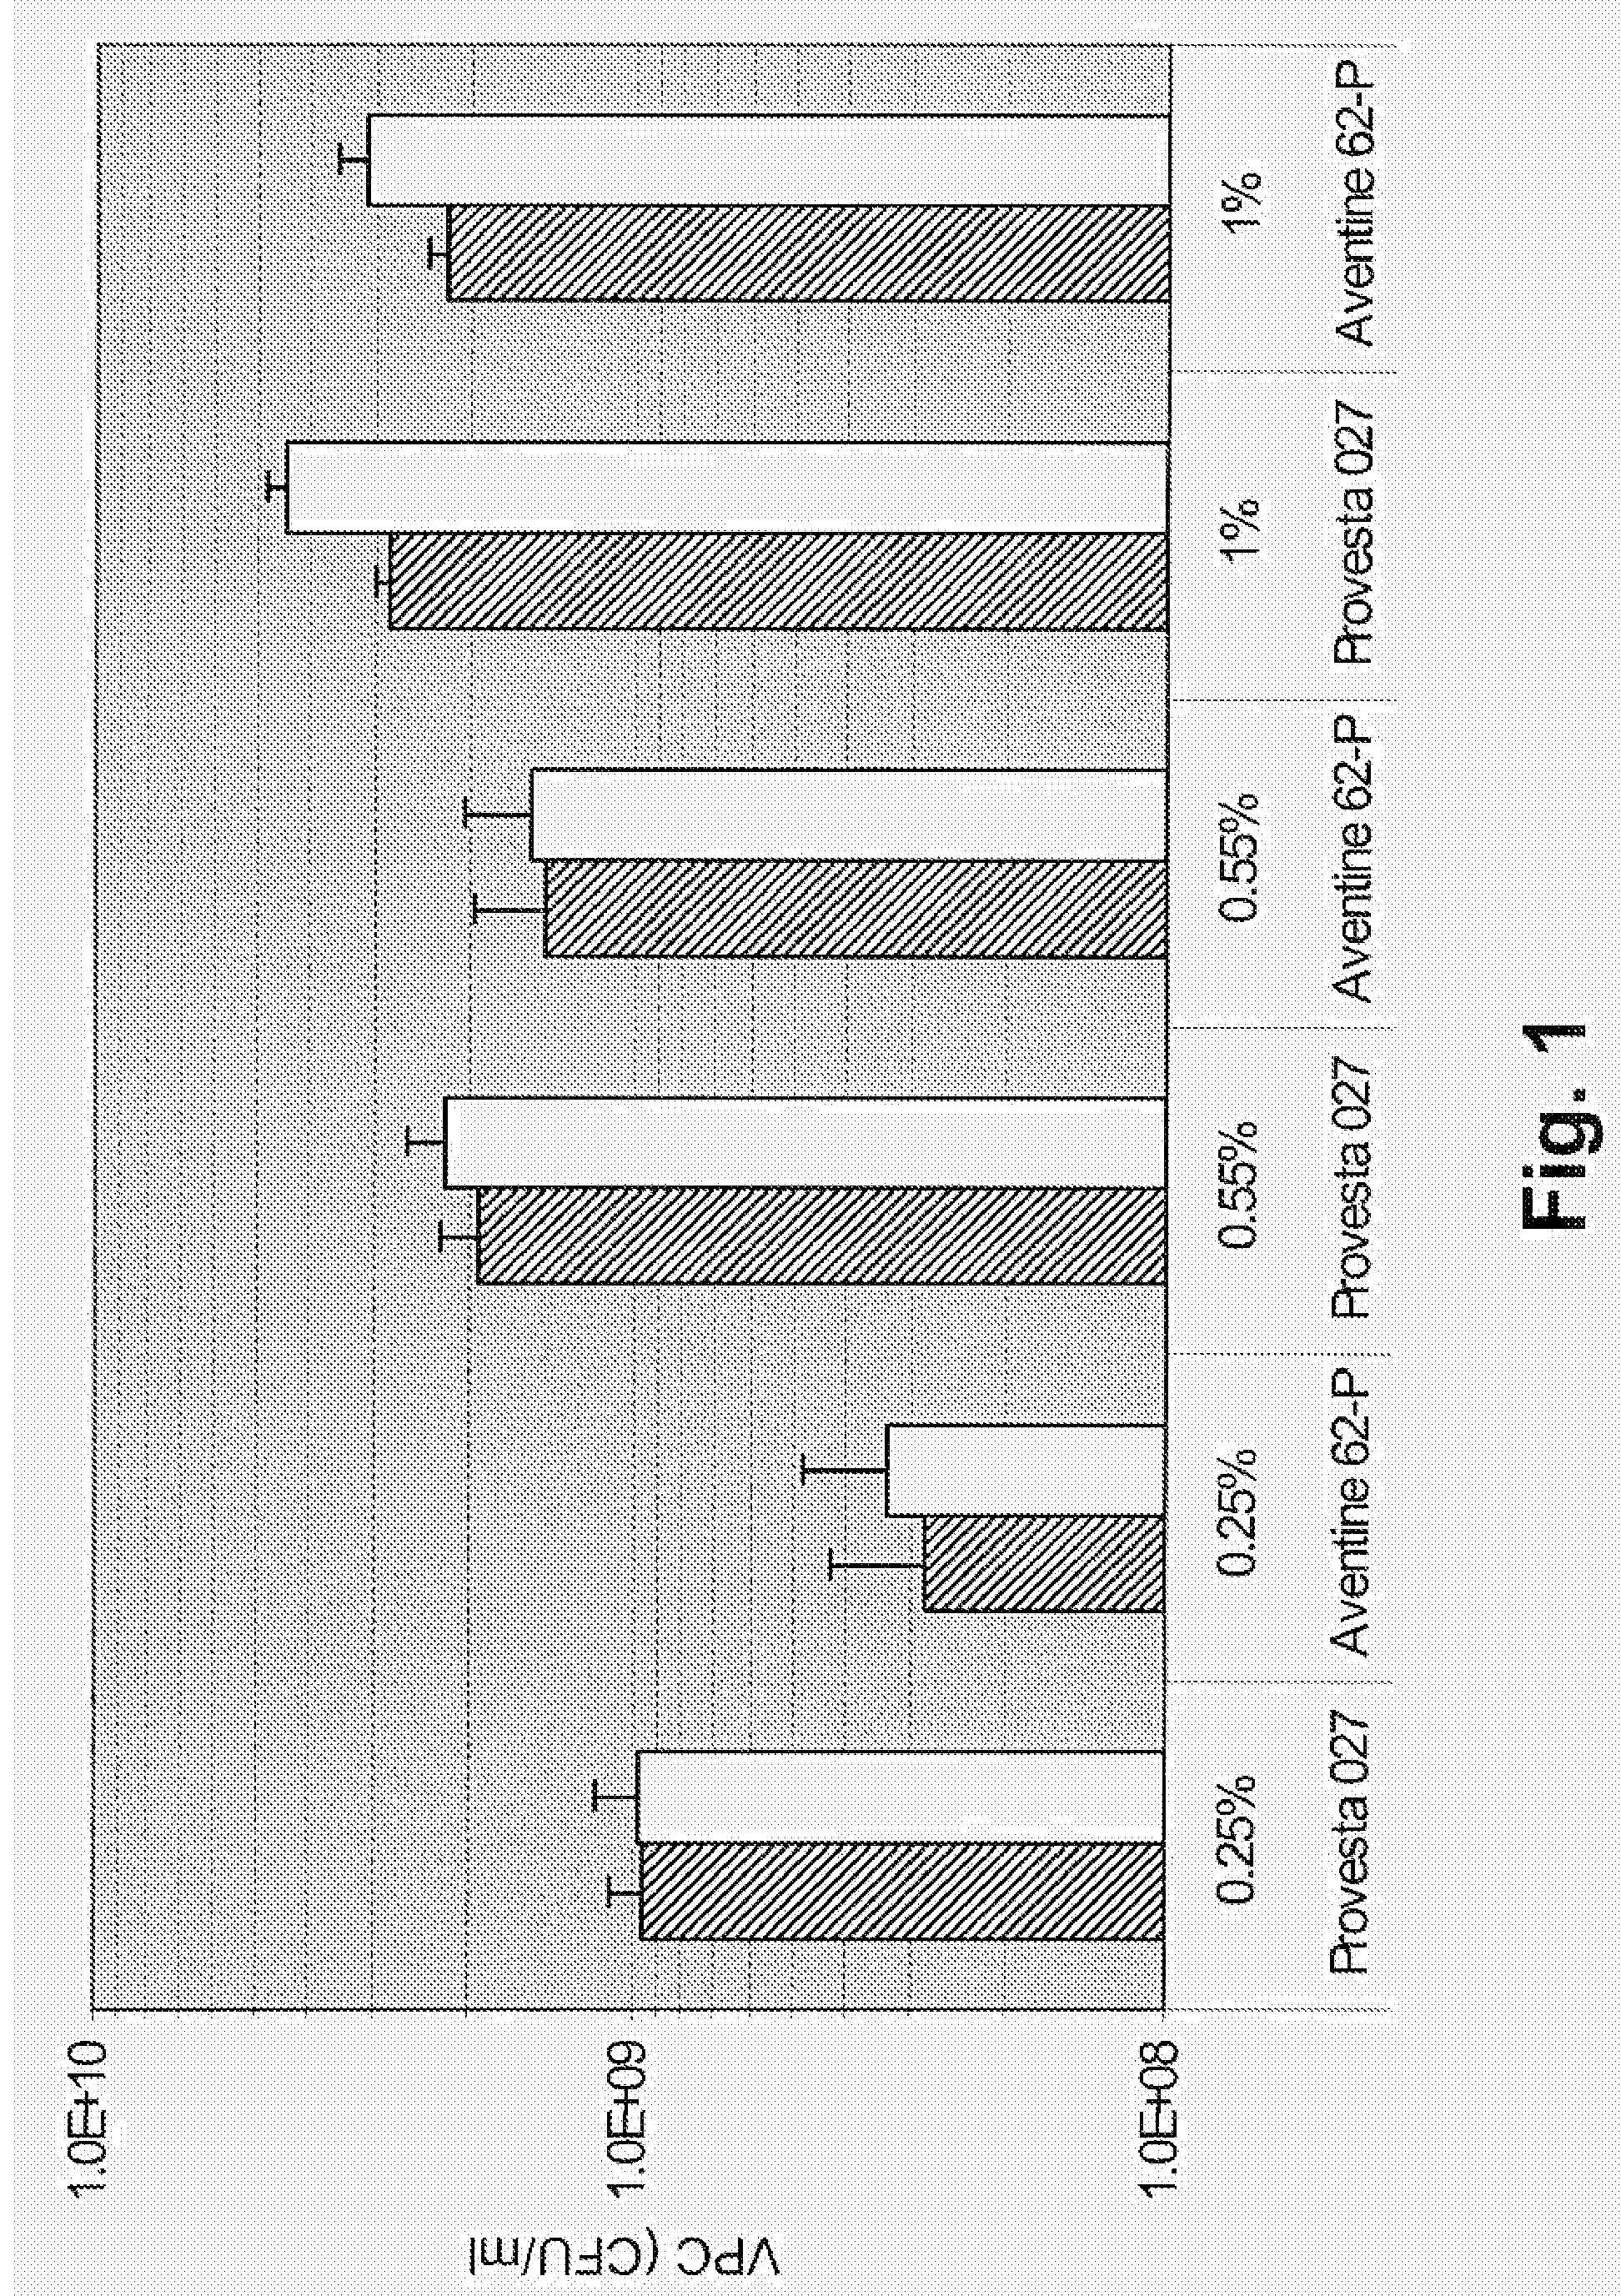 Composition comprising enzymatically digested yeast cells and method of preparing same